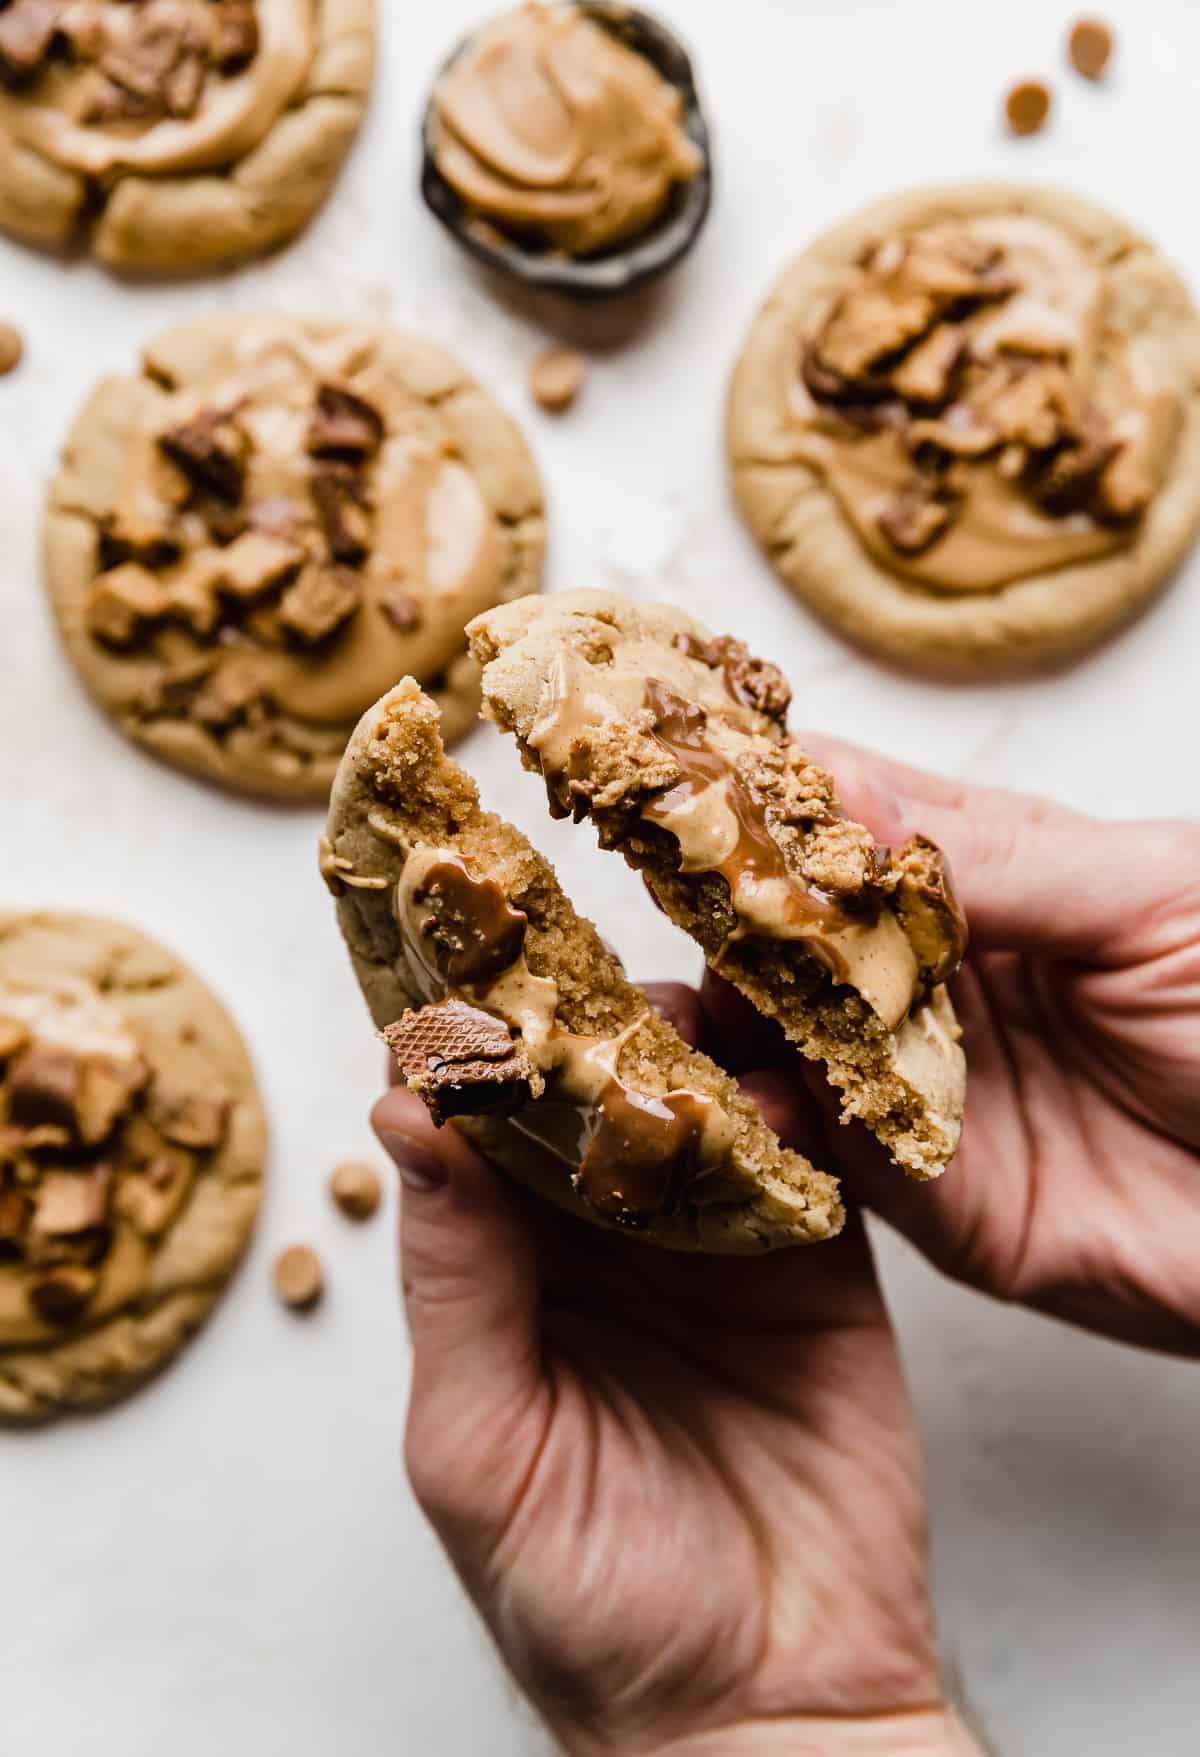 A pair of hands breaking a copycat Crumbl Peanut Butter Cup Cookie in half.